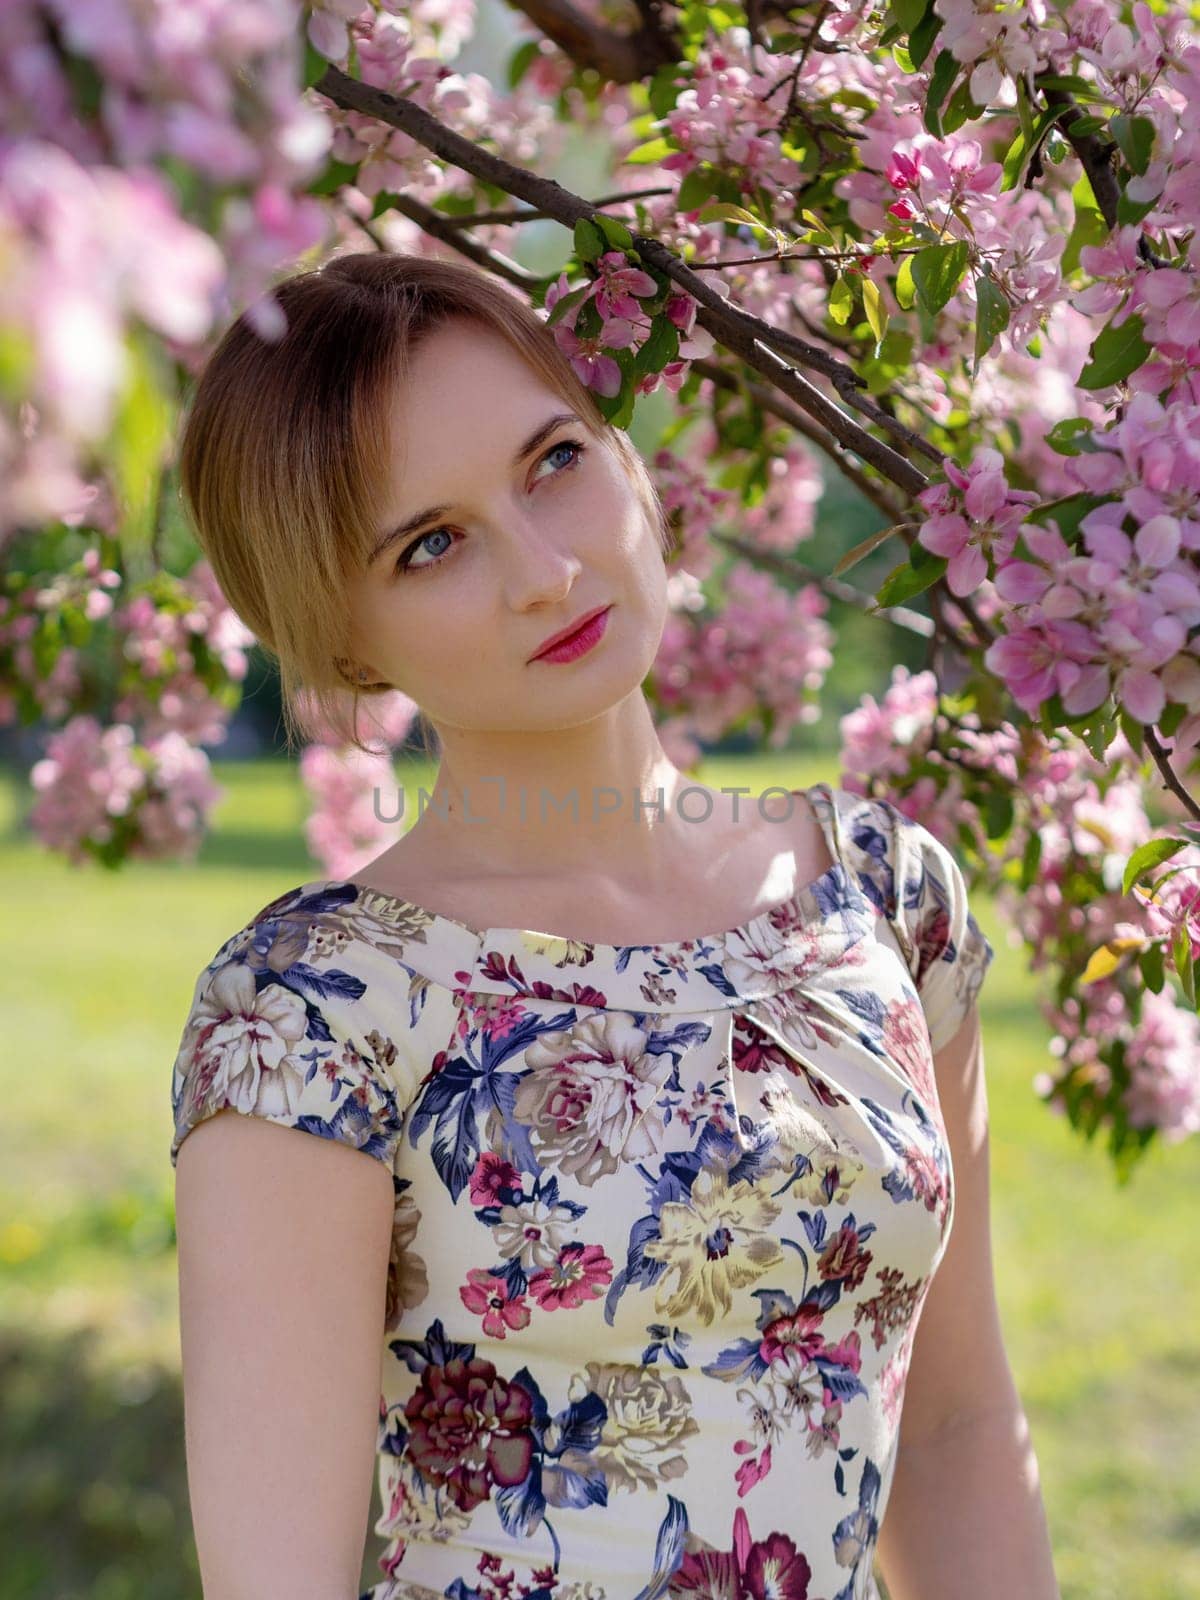 Beautiful young girl in a flowered garden. Tender woman in a dress with a floral print among blooming spring apple trees. by Andre1ns